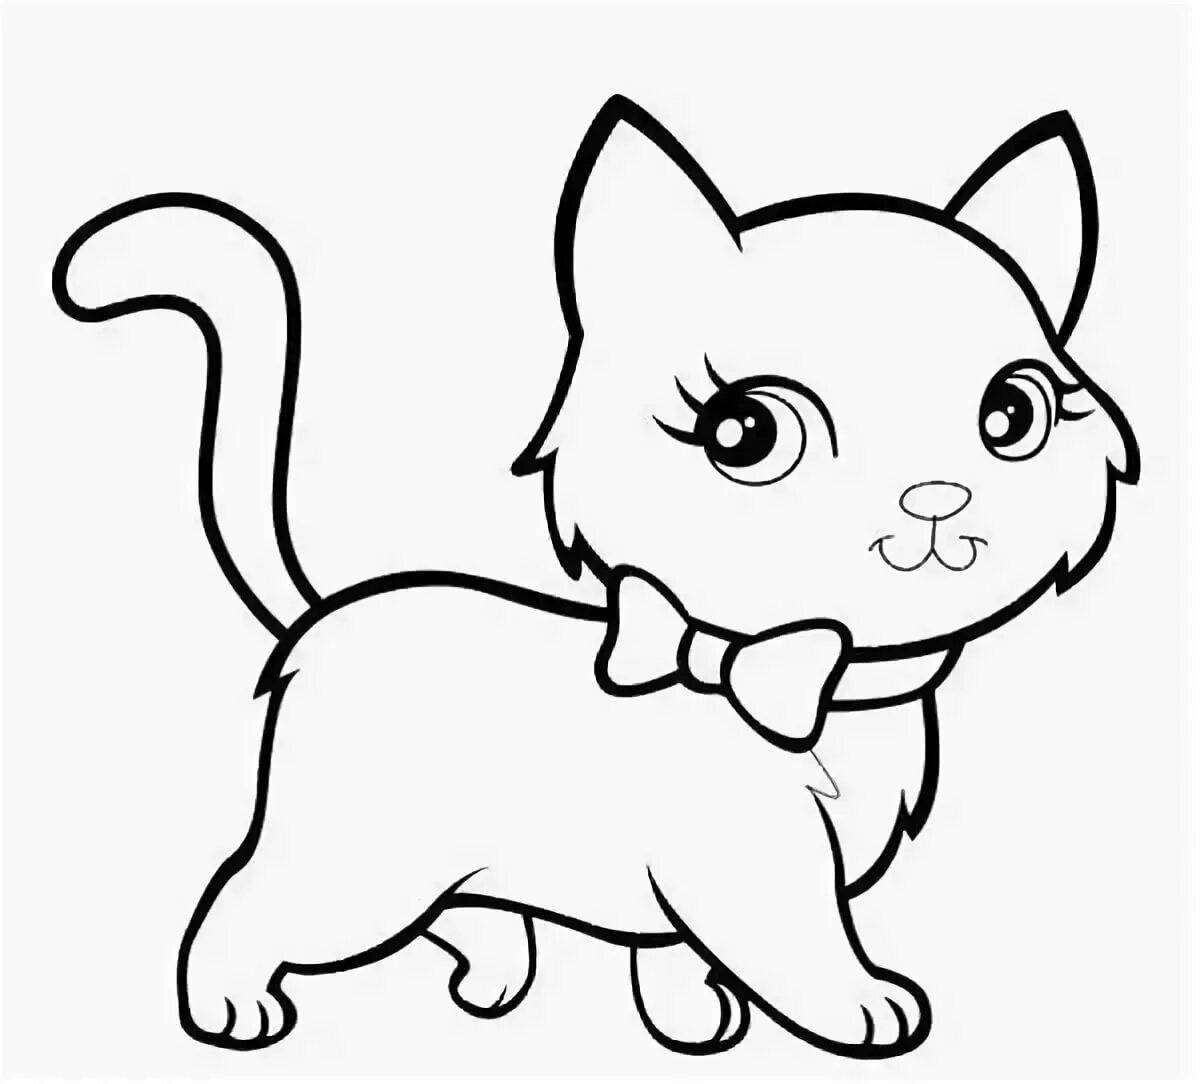 Cat coloring book for children 5-6 years old